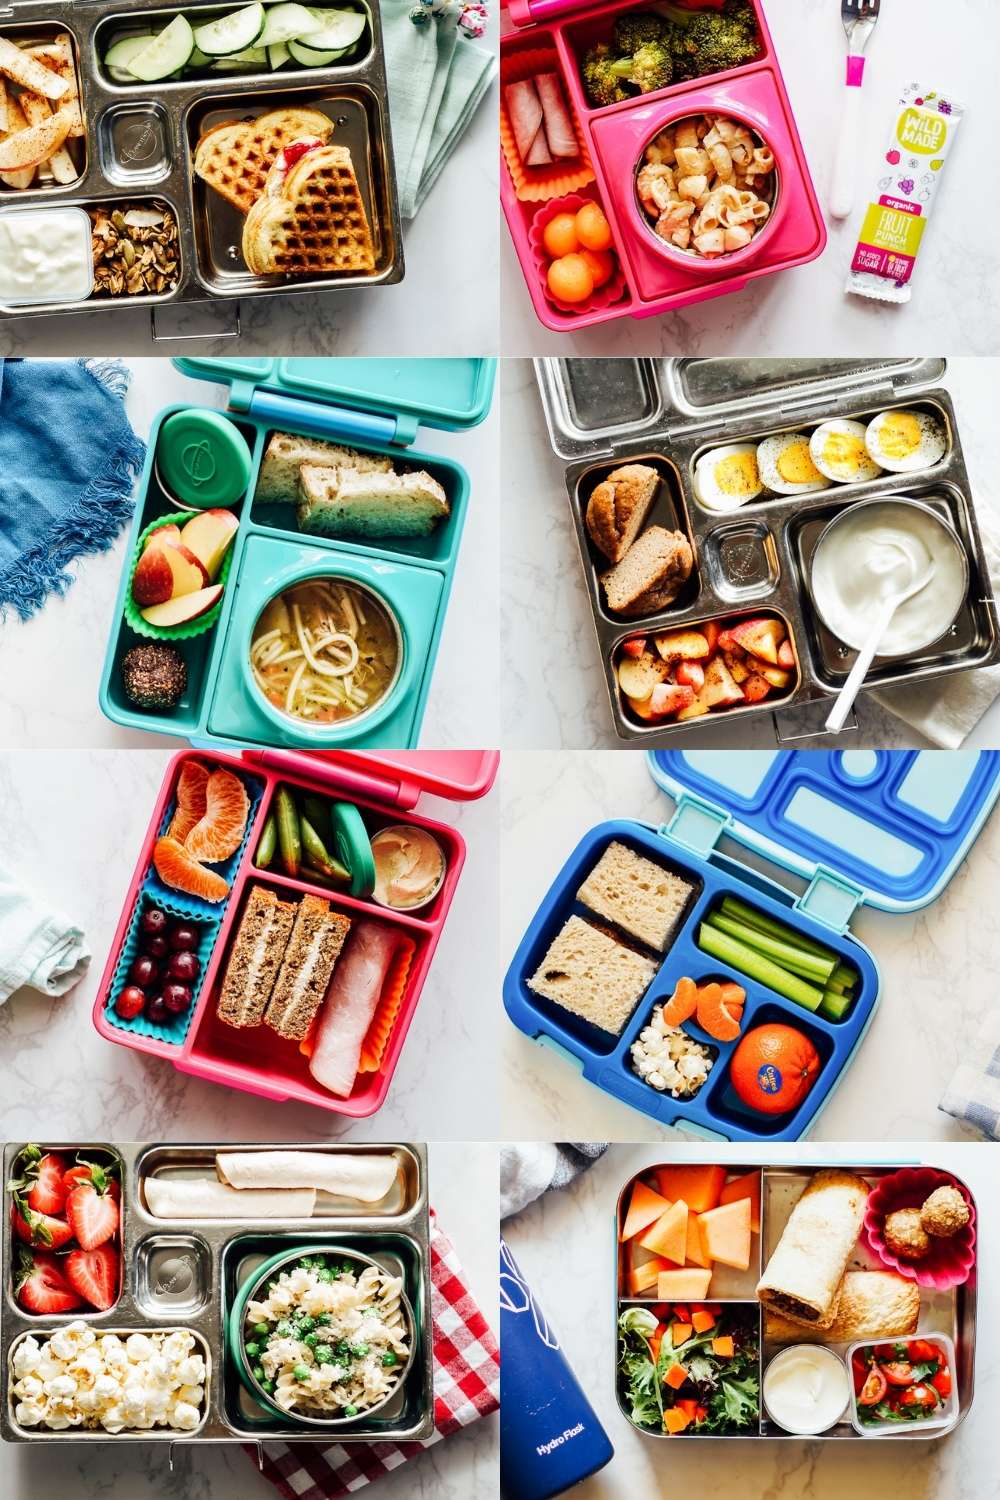 The Best School Lunch Idea: the Bento Box - The New York Times